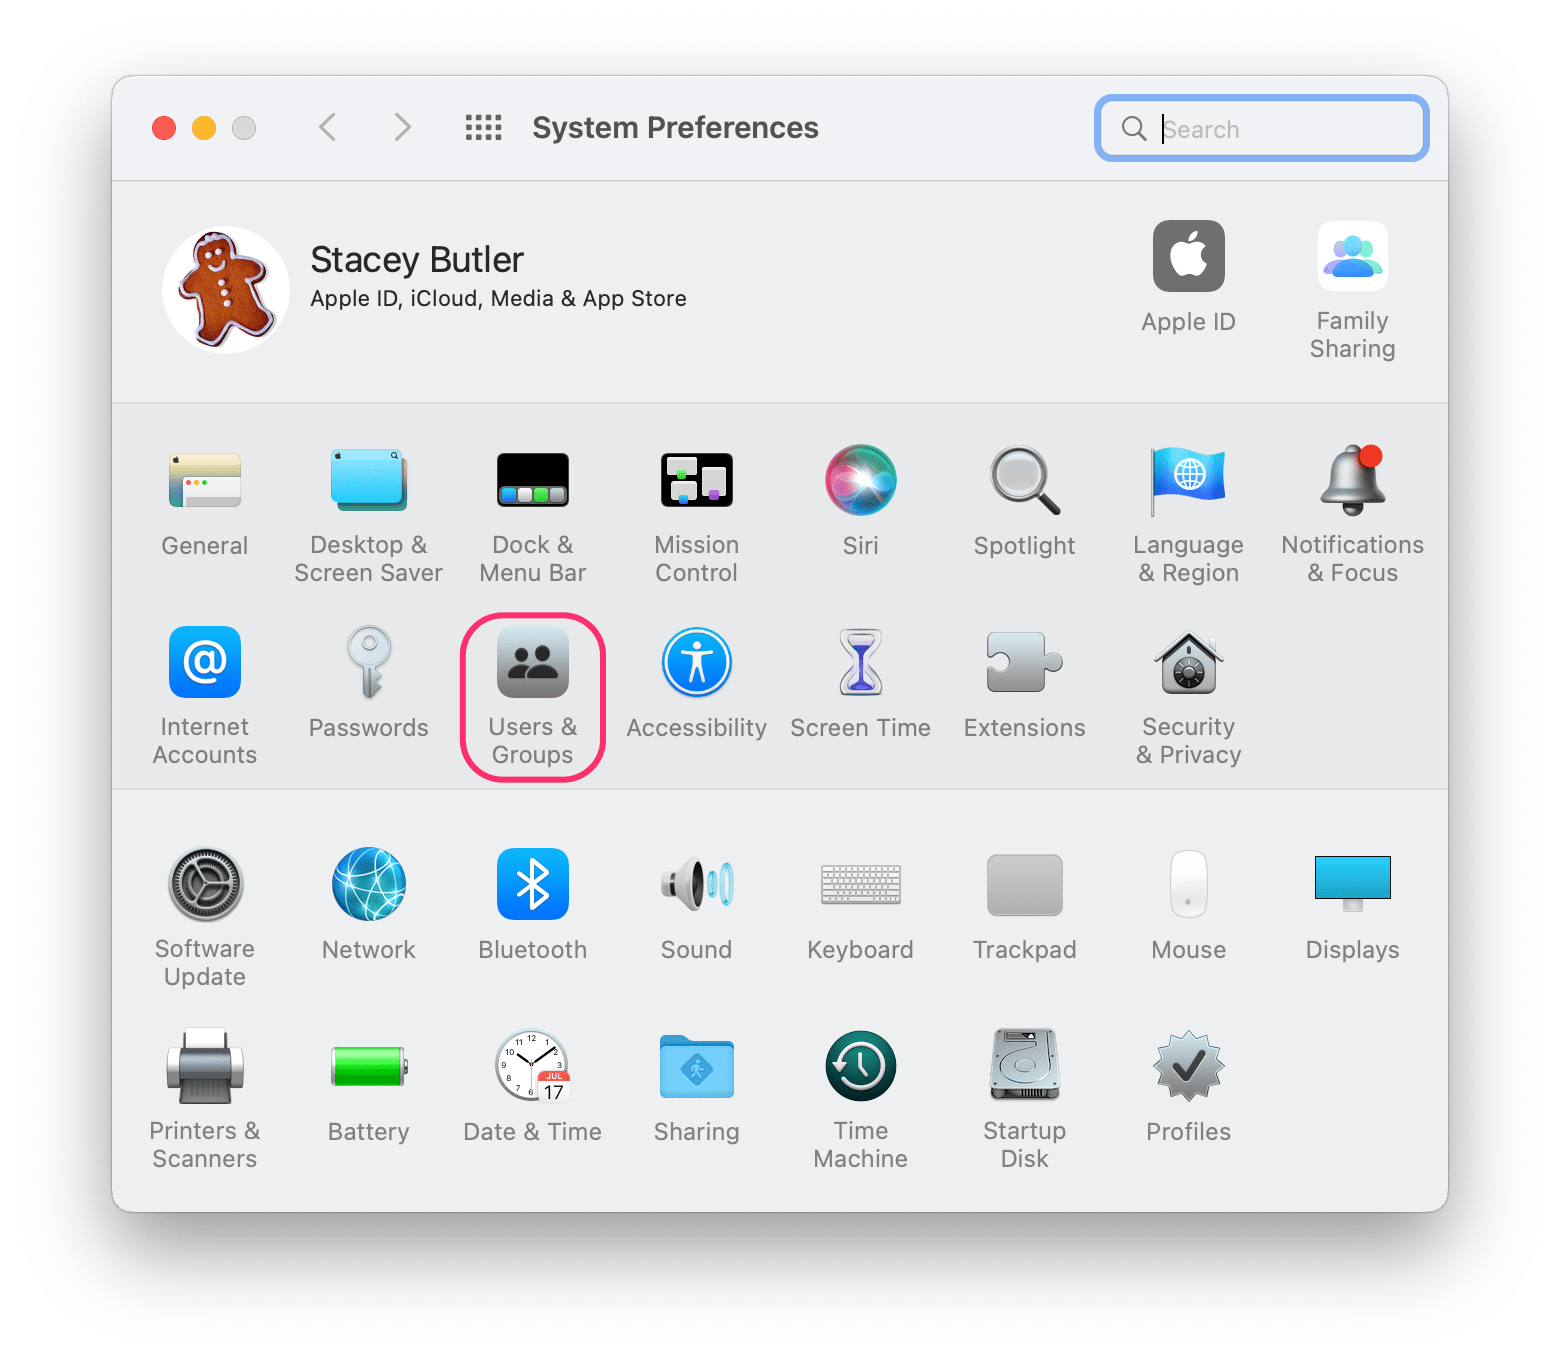 users & groups in system preferences